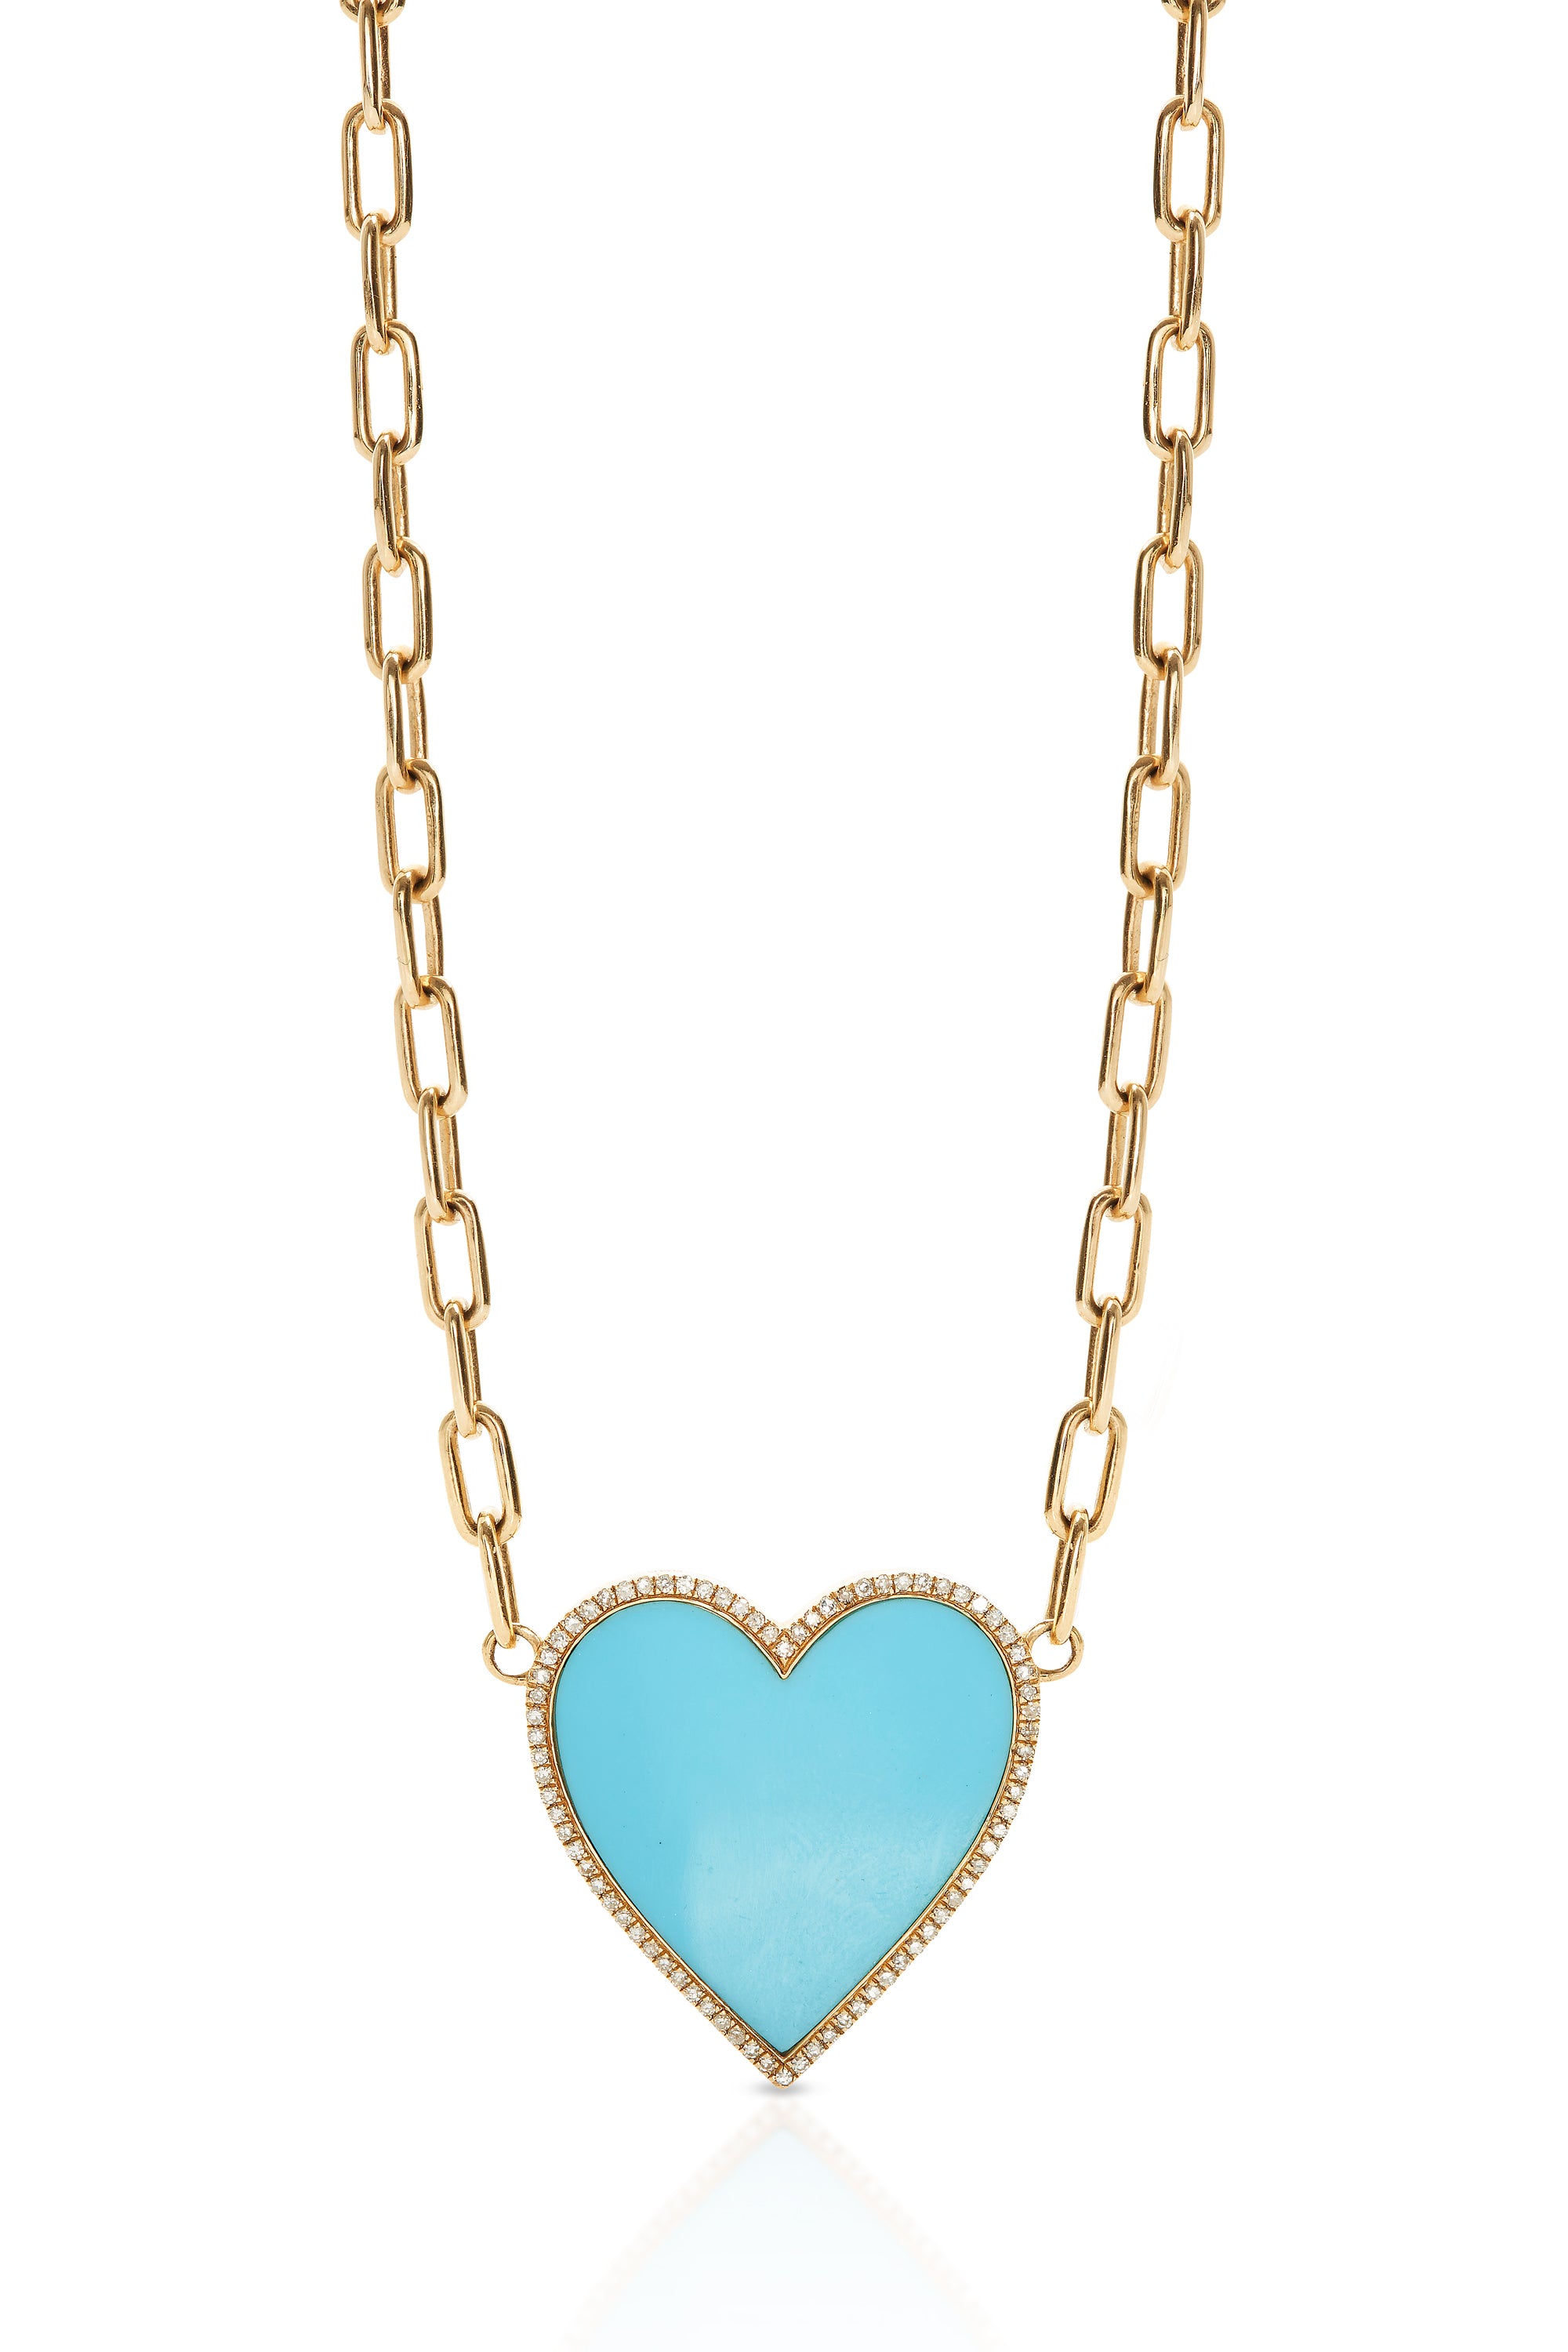 14KY Turquoise and Diamond Heart on Link Chain